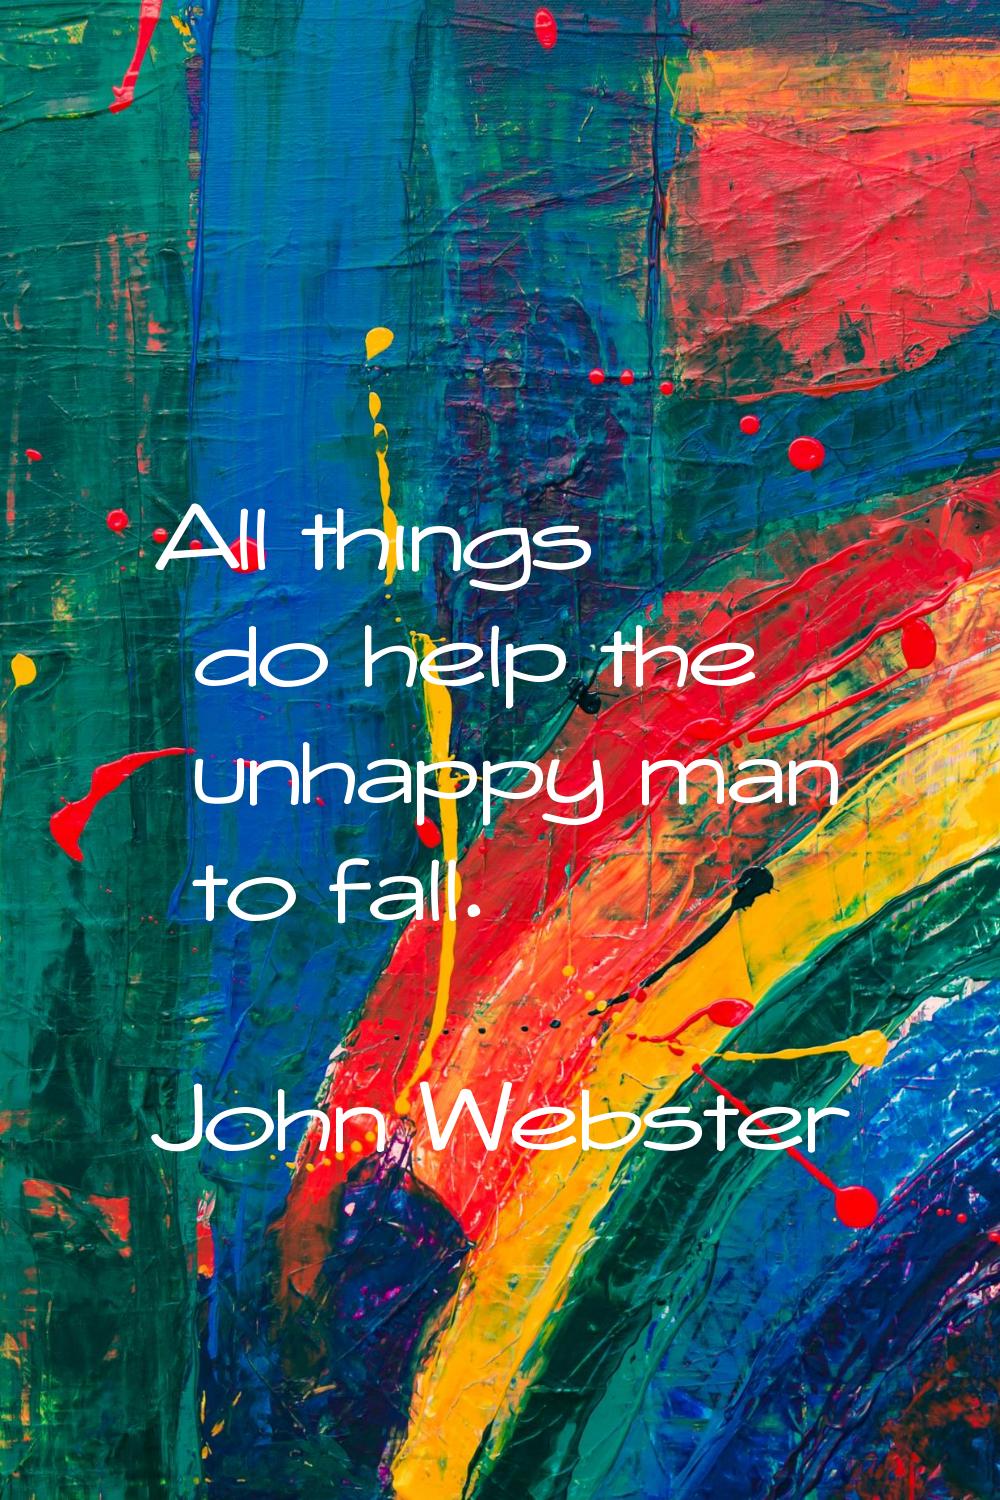 All things do help the unhappy man to fall.